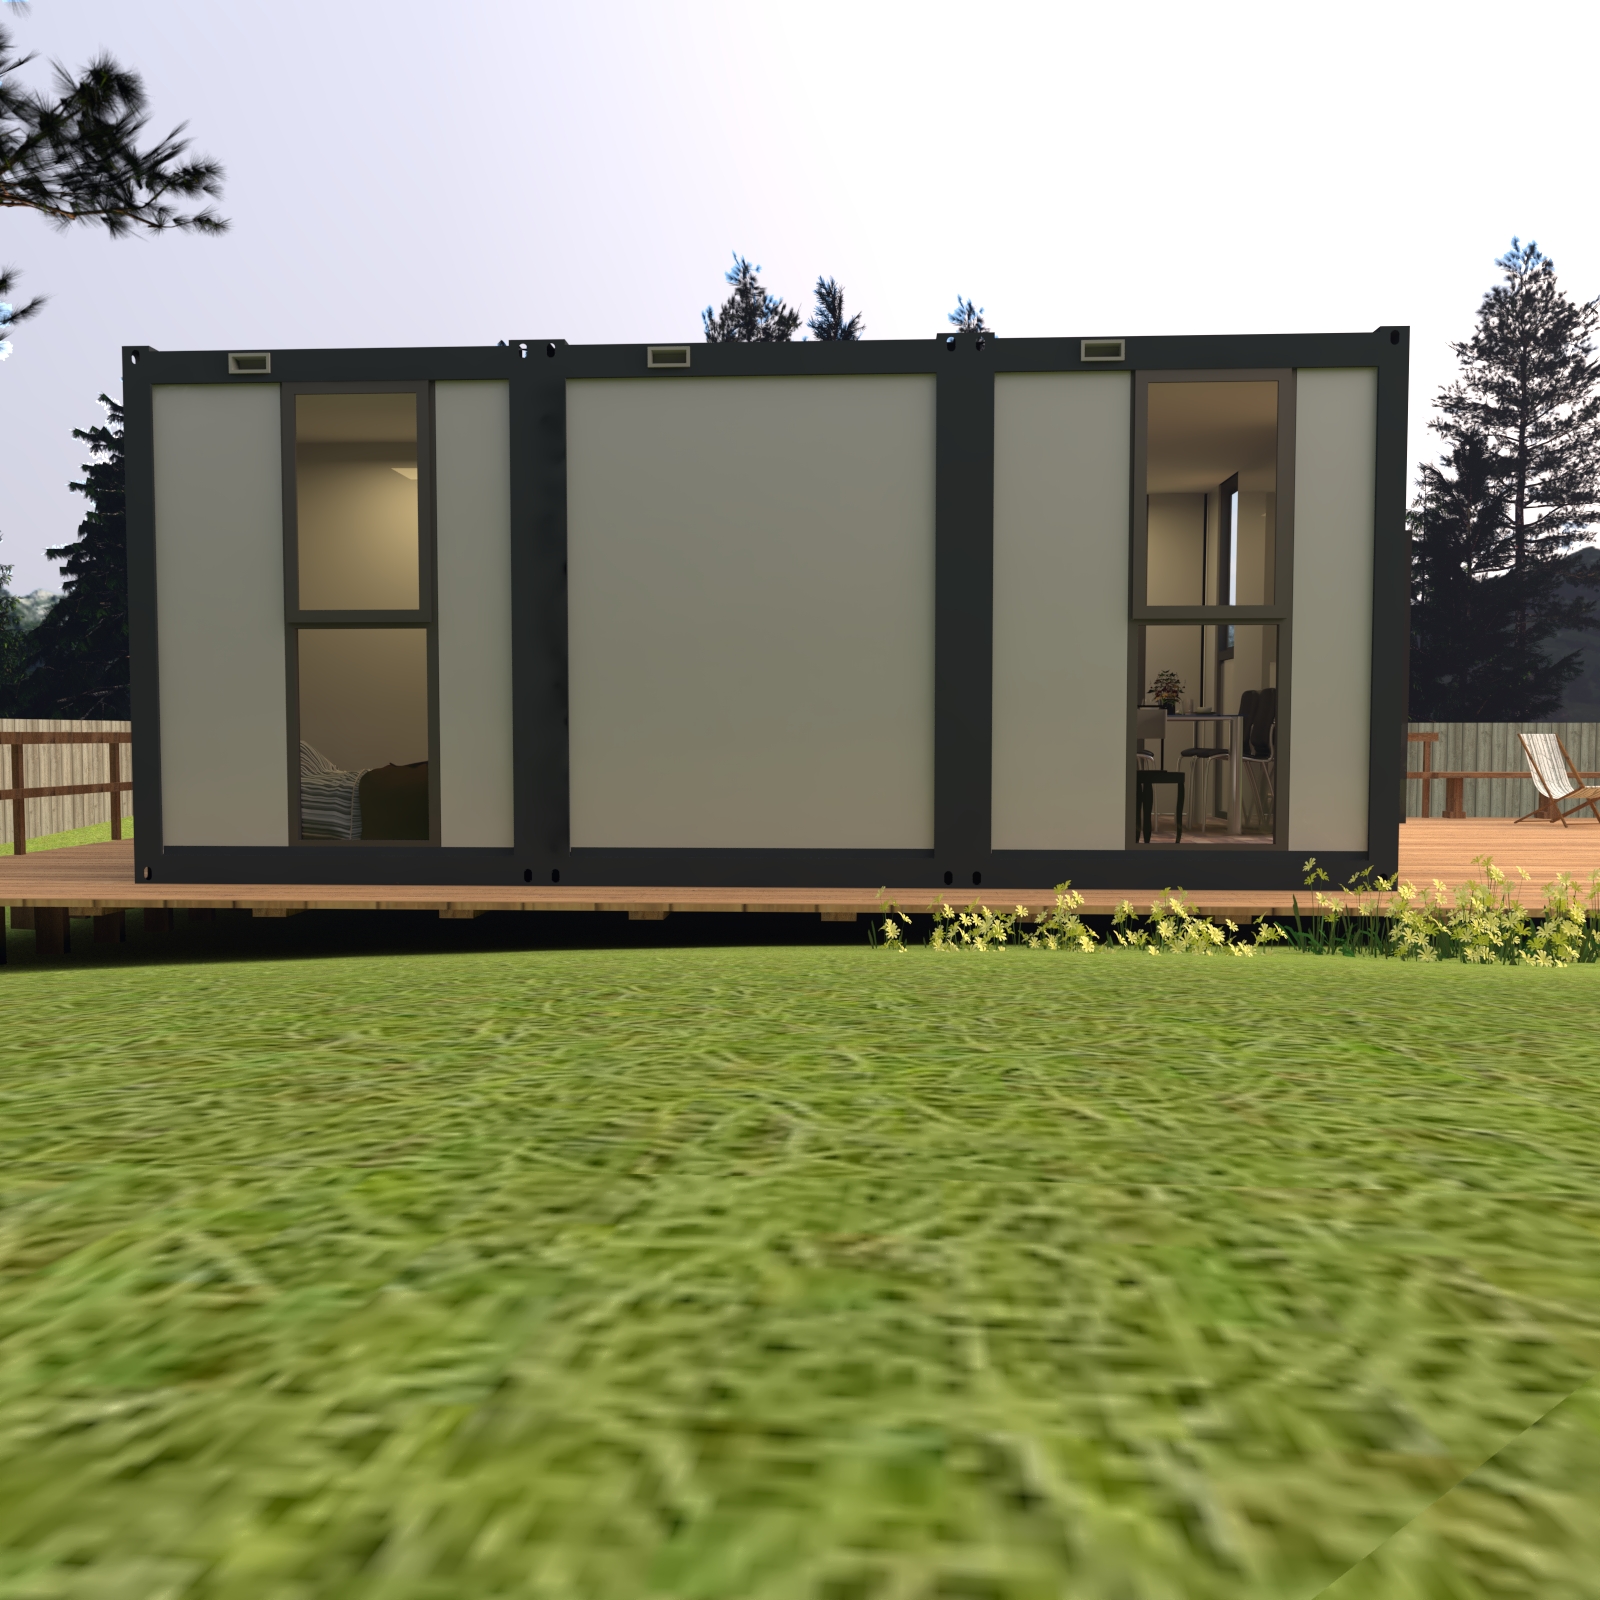 Prefabricated Modular Tiny Houses For Sale Modern Design Luxurious Container Home Prefab Houses